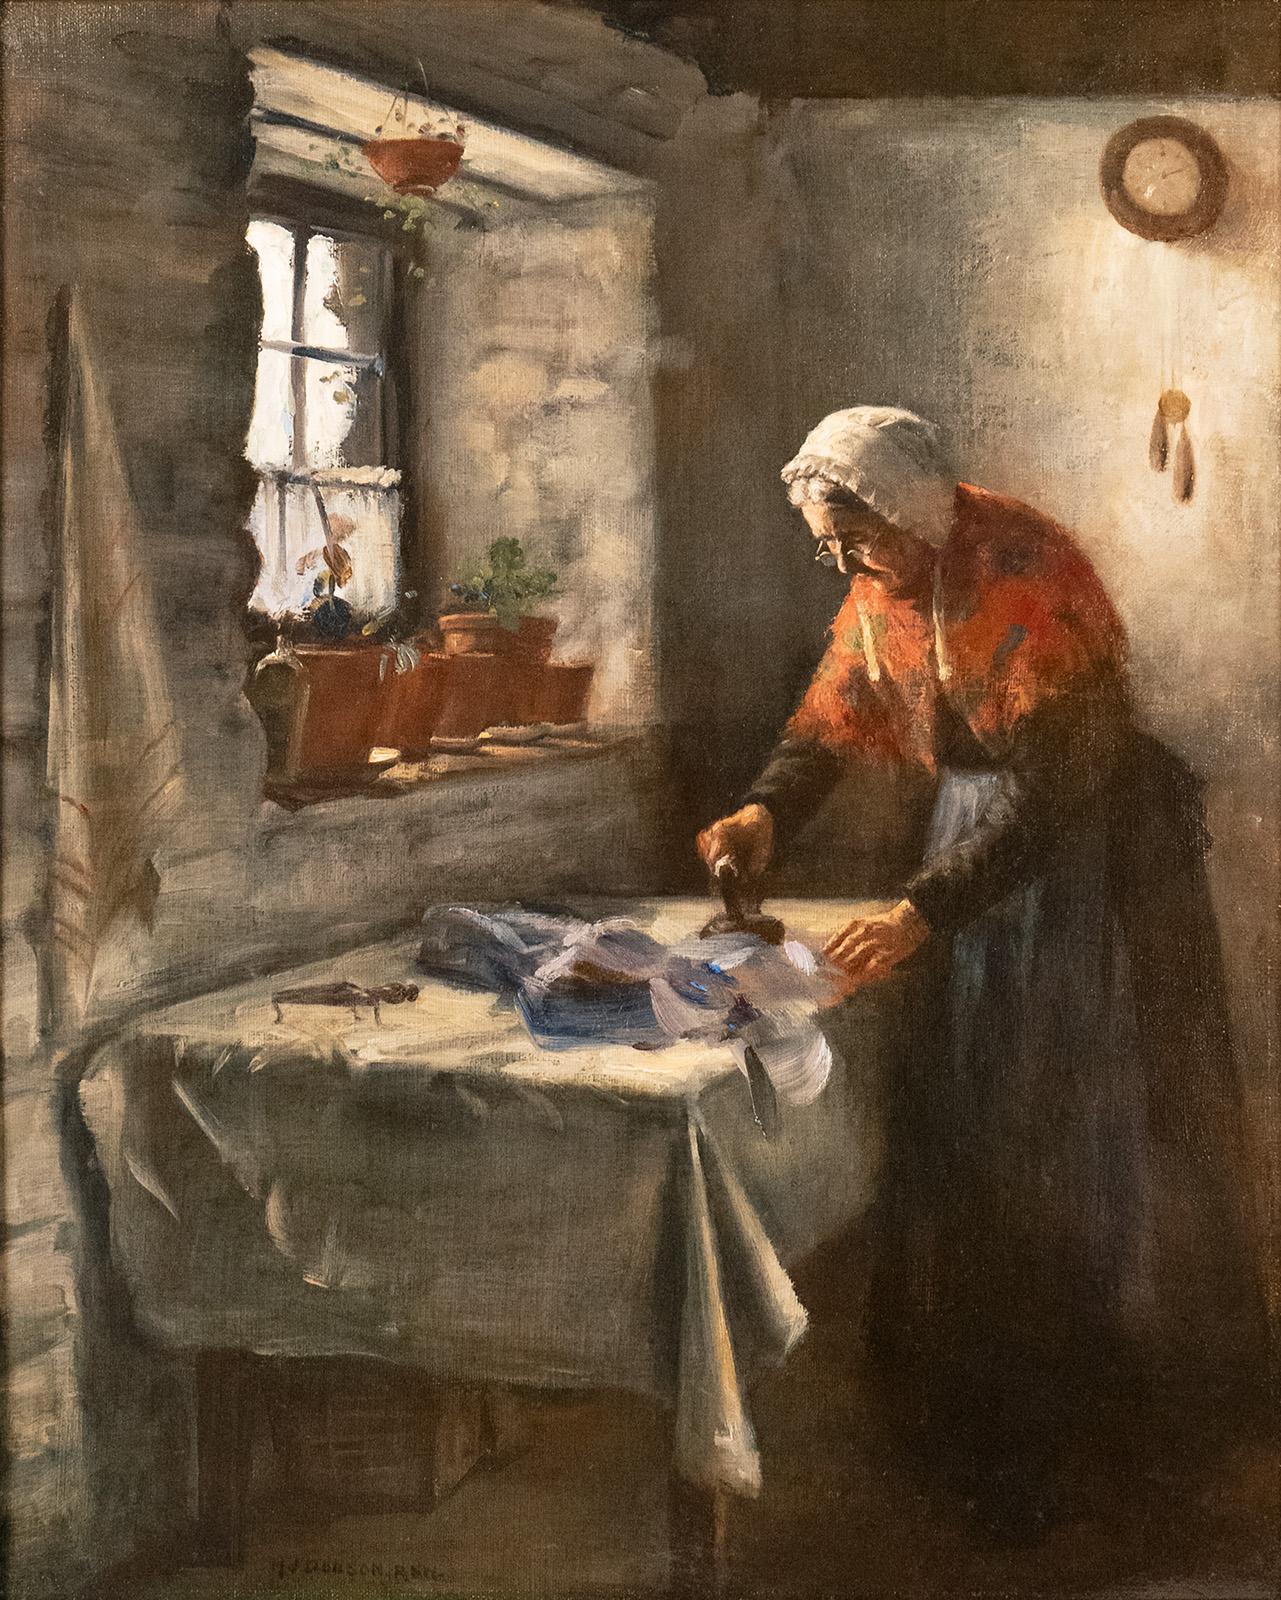 Lady Ironing in Interior by Henry John Dobson 1